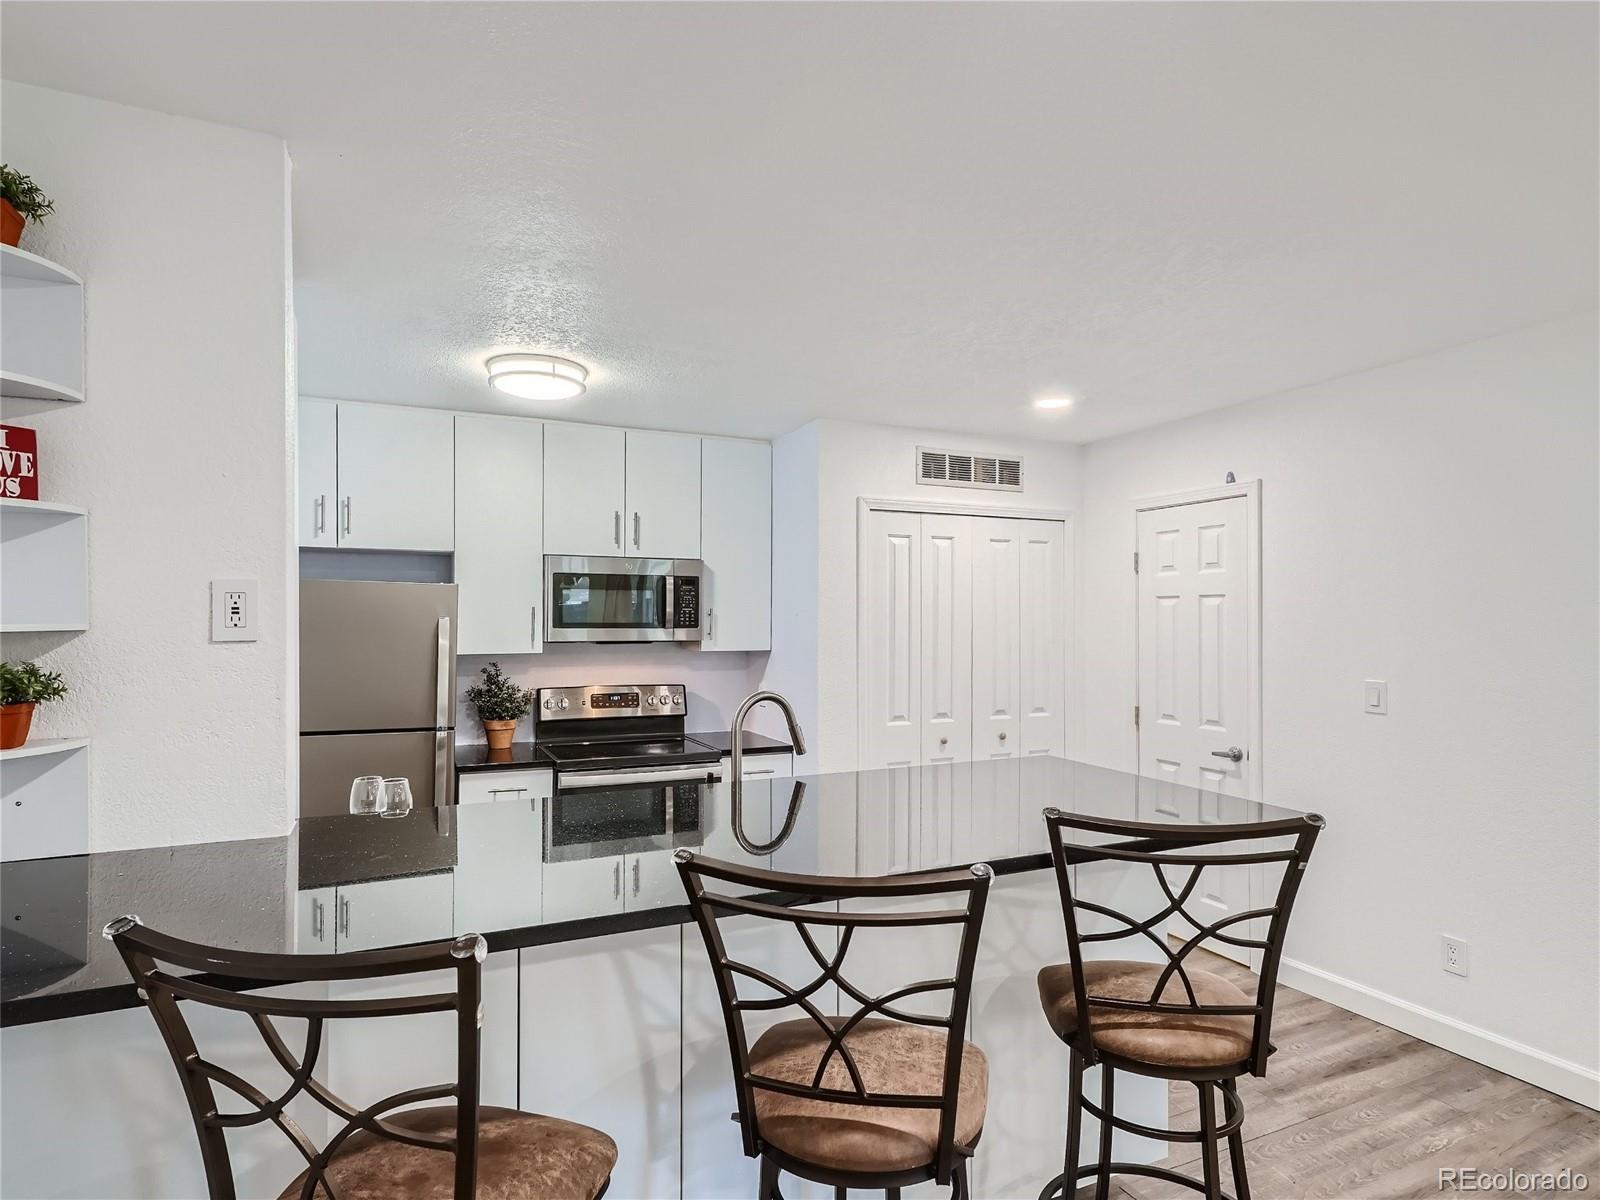 a kitchen with stainless steel appliances wooden cabinets dining table and chairs